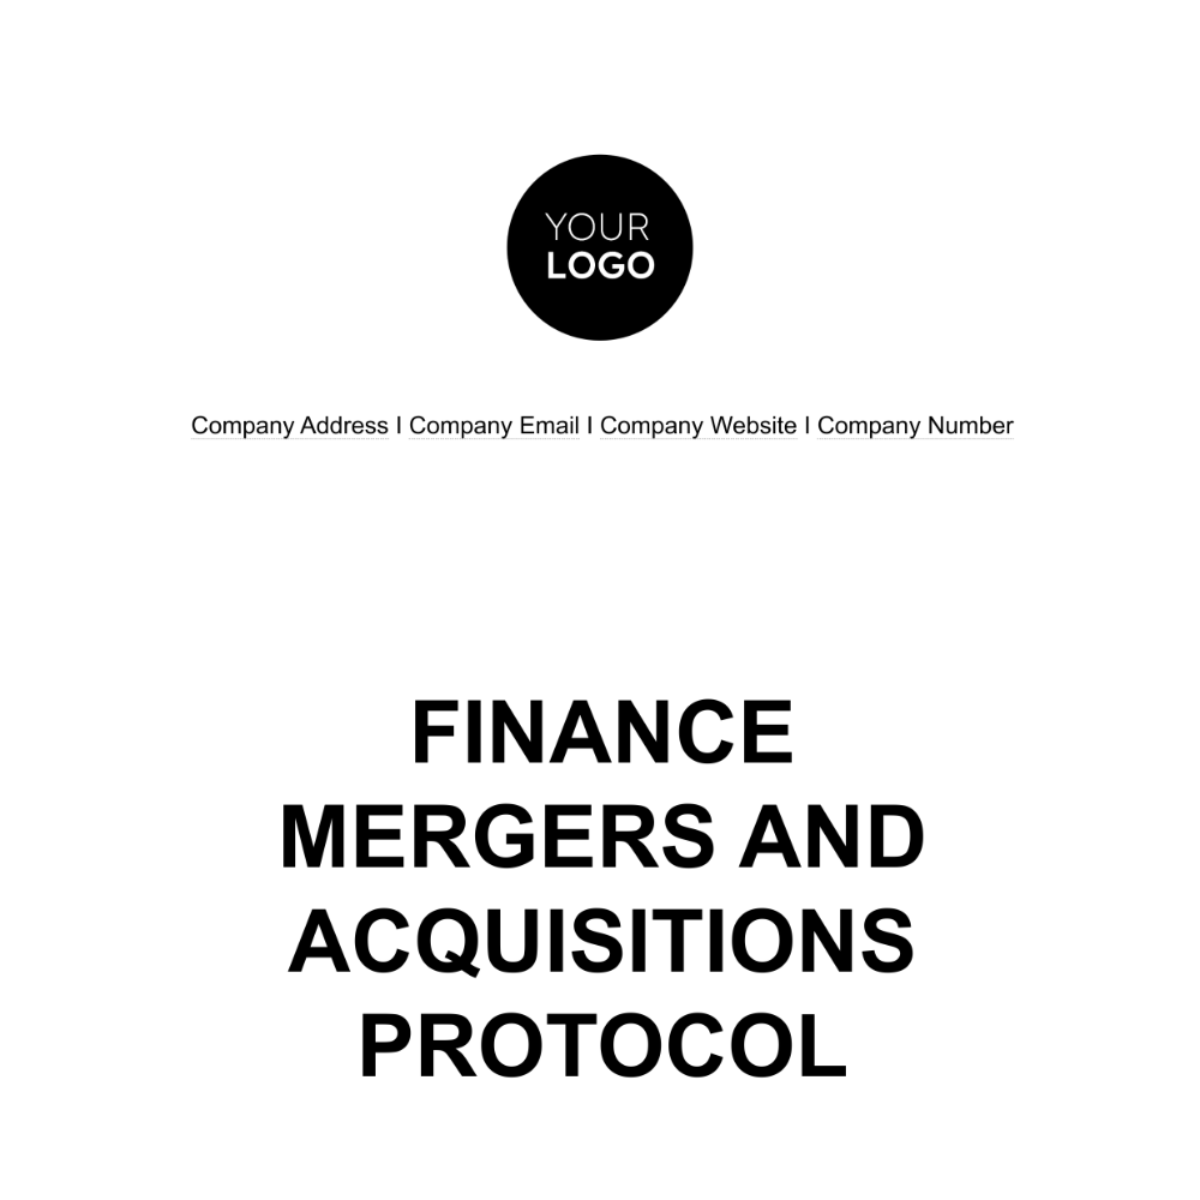 Finance Mergers & Acquisitions Protocol Template